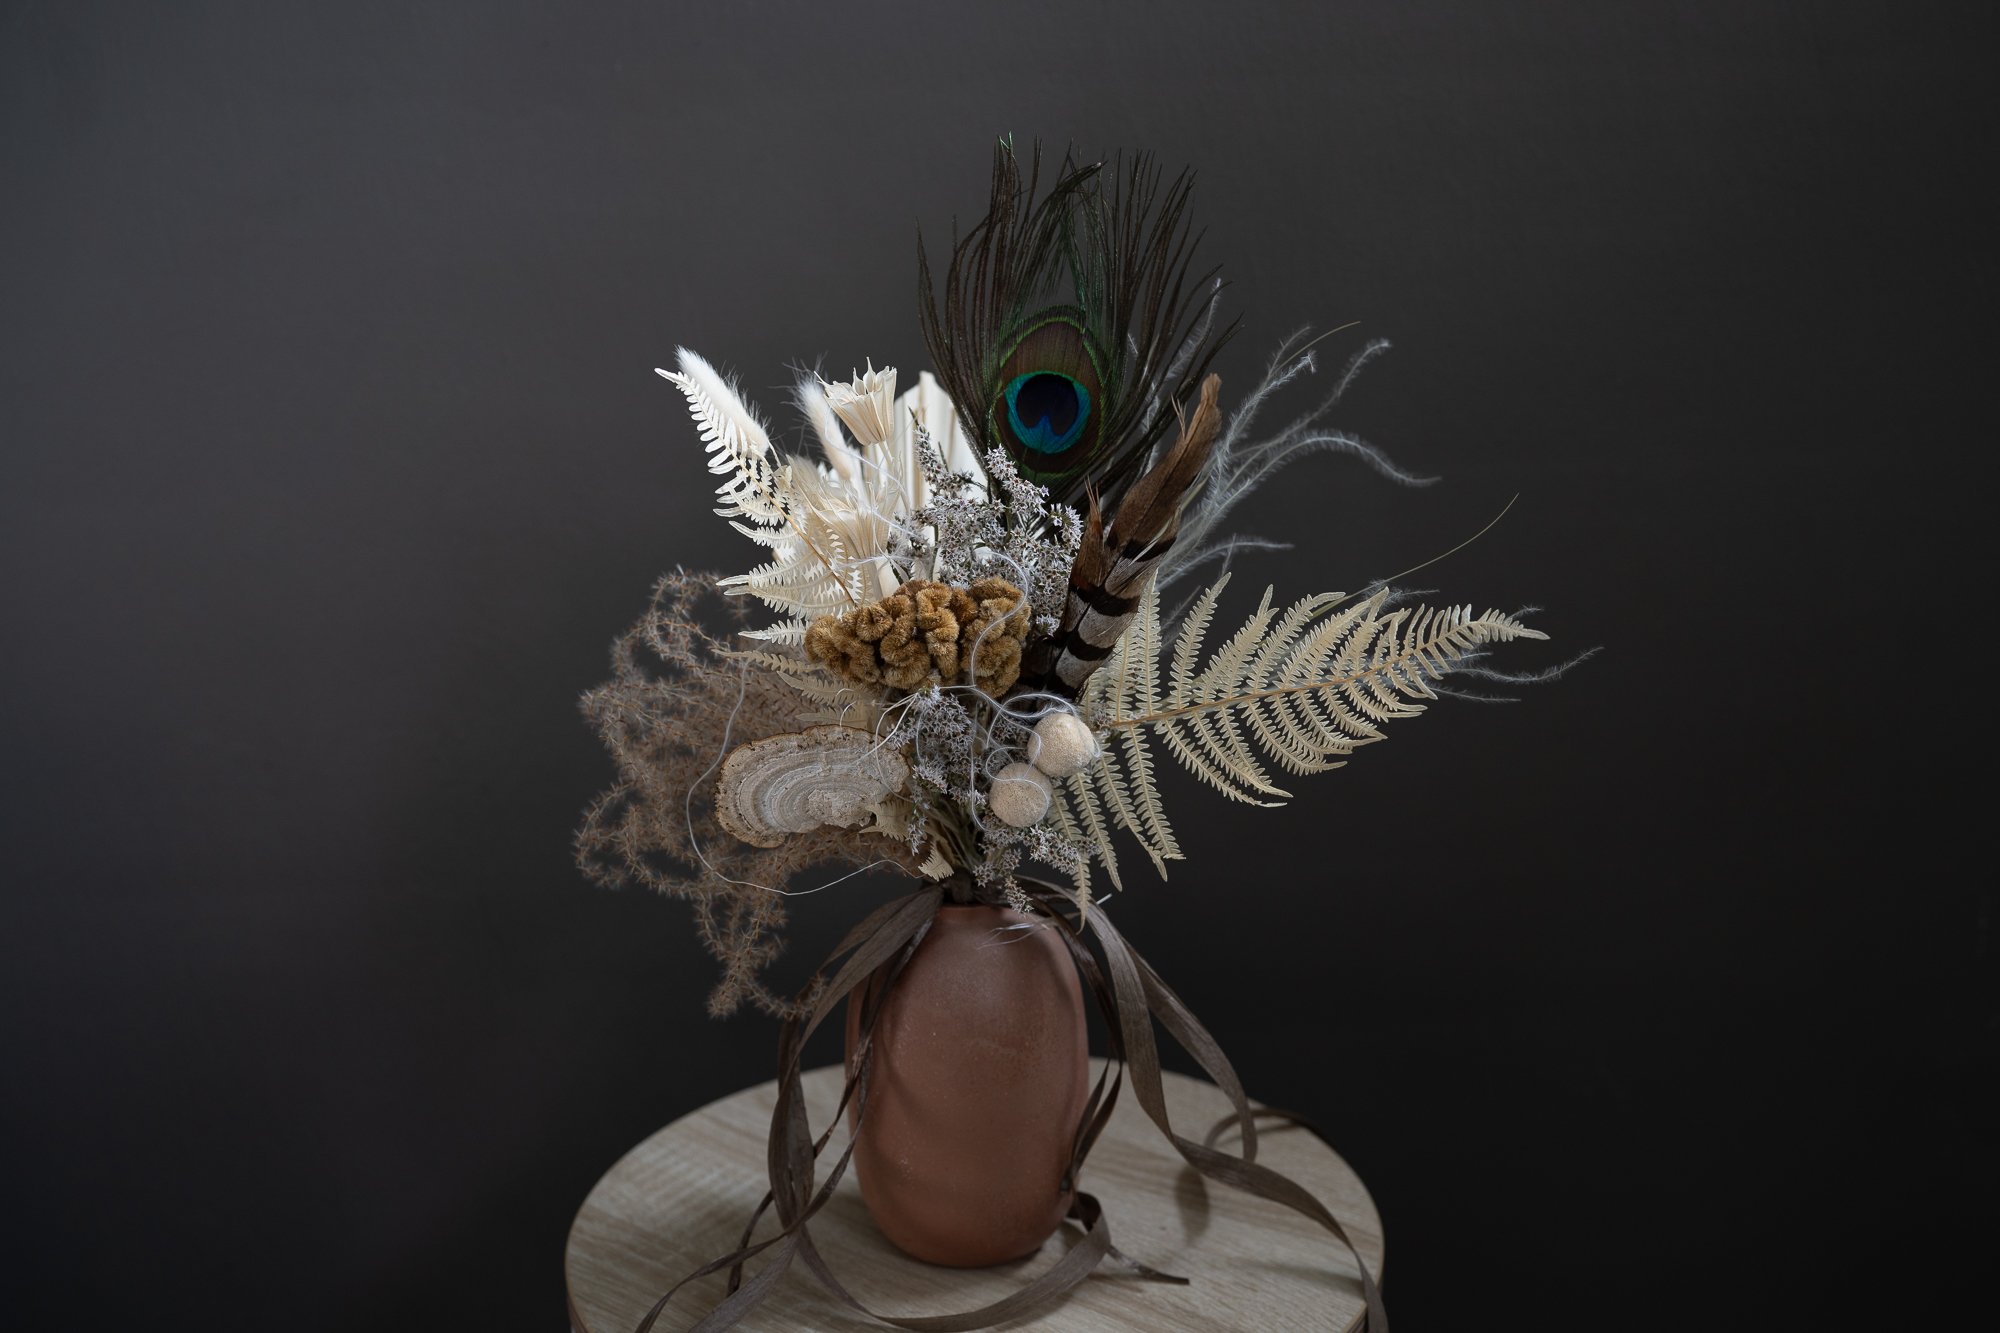 An image of preserved flower bouquet featuring a peacock feather.